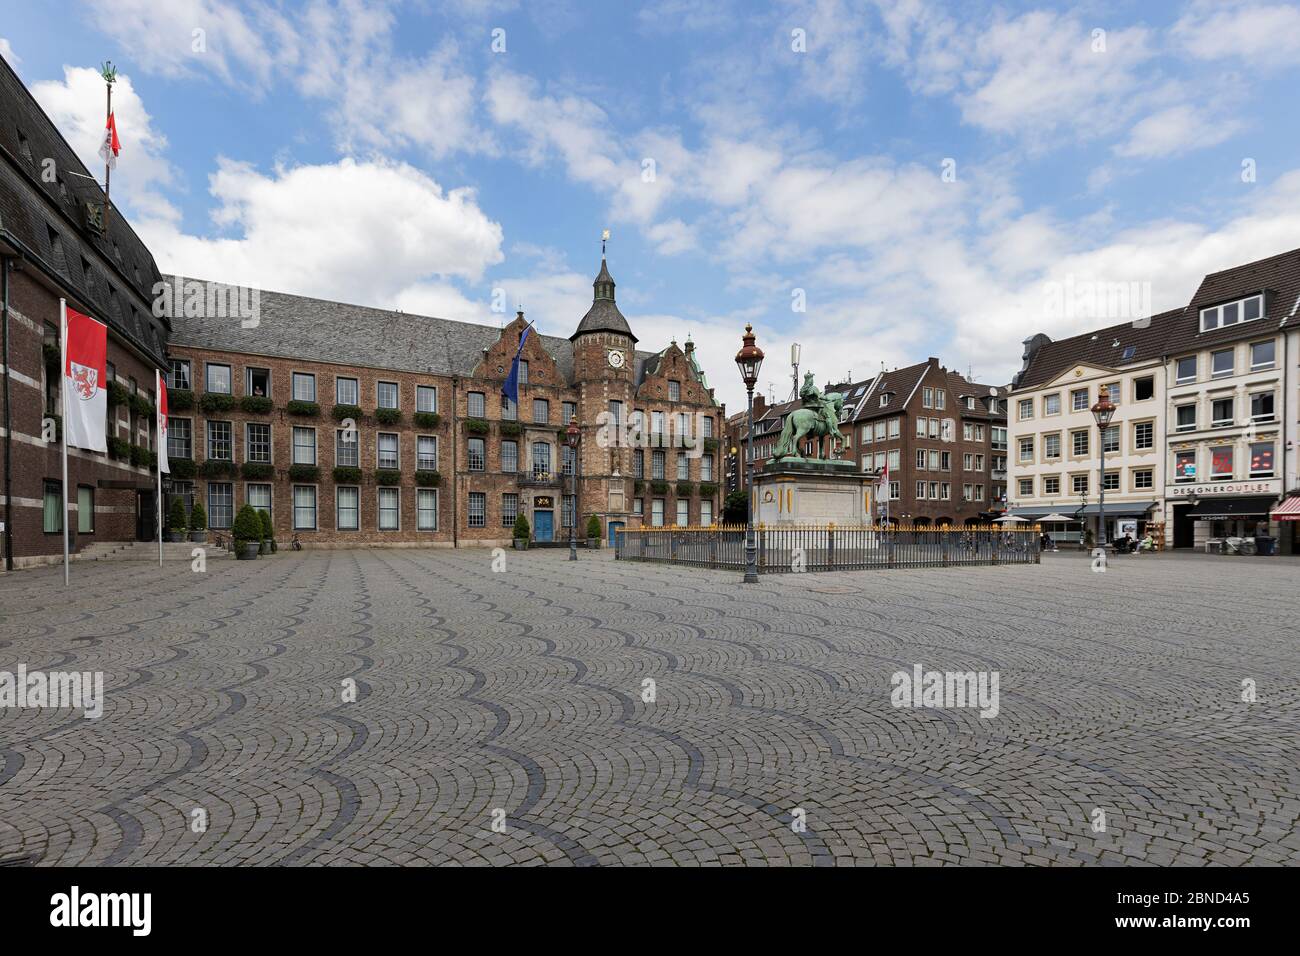 Duesseldorf -  View to the Townhall which goes back to 1570 in the oldest parts of the building.,  North Rhine Westphalia, Germany,  12.05.2020 Stock Photo